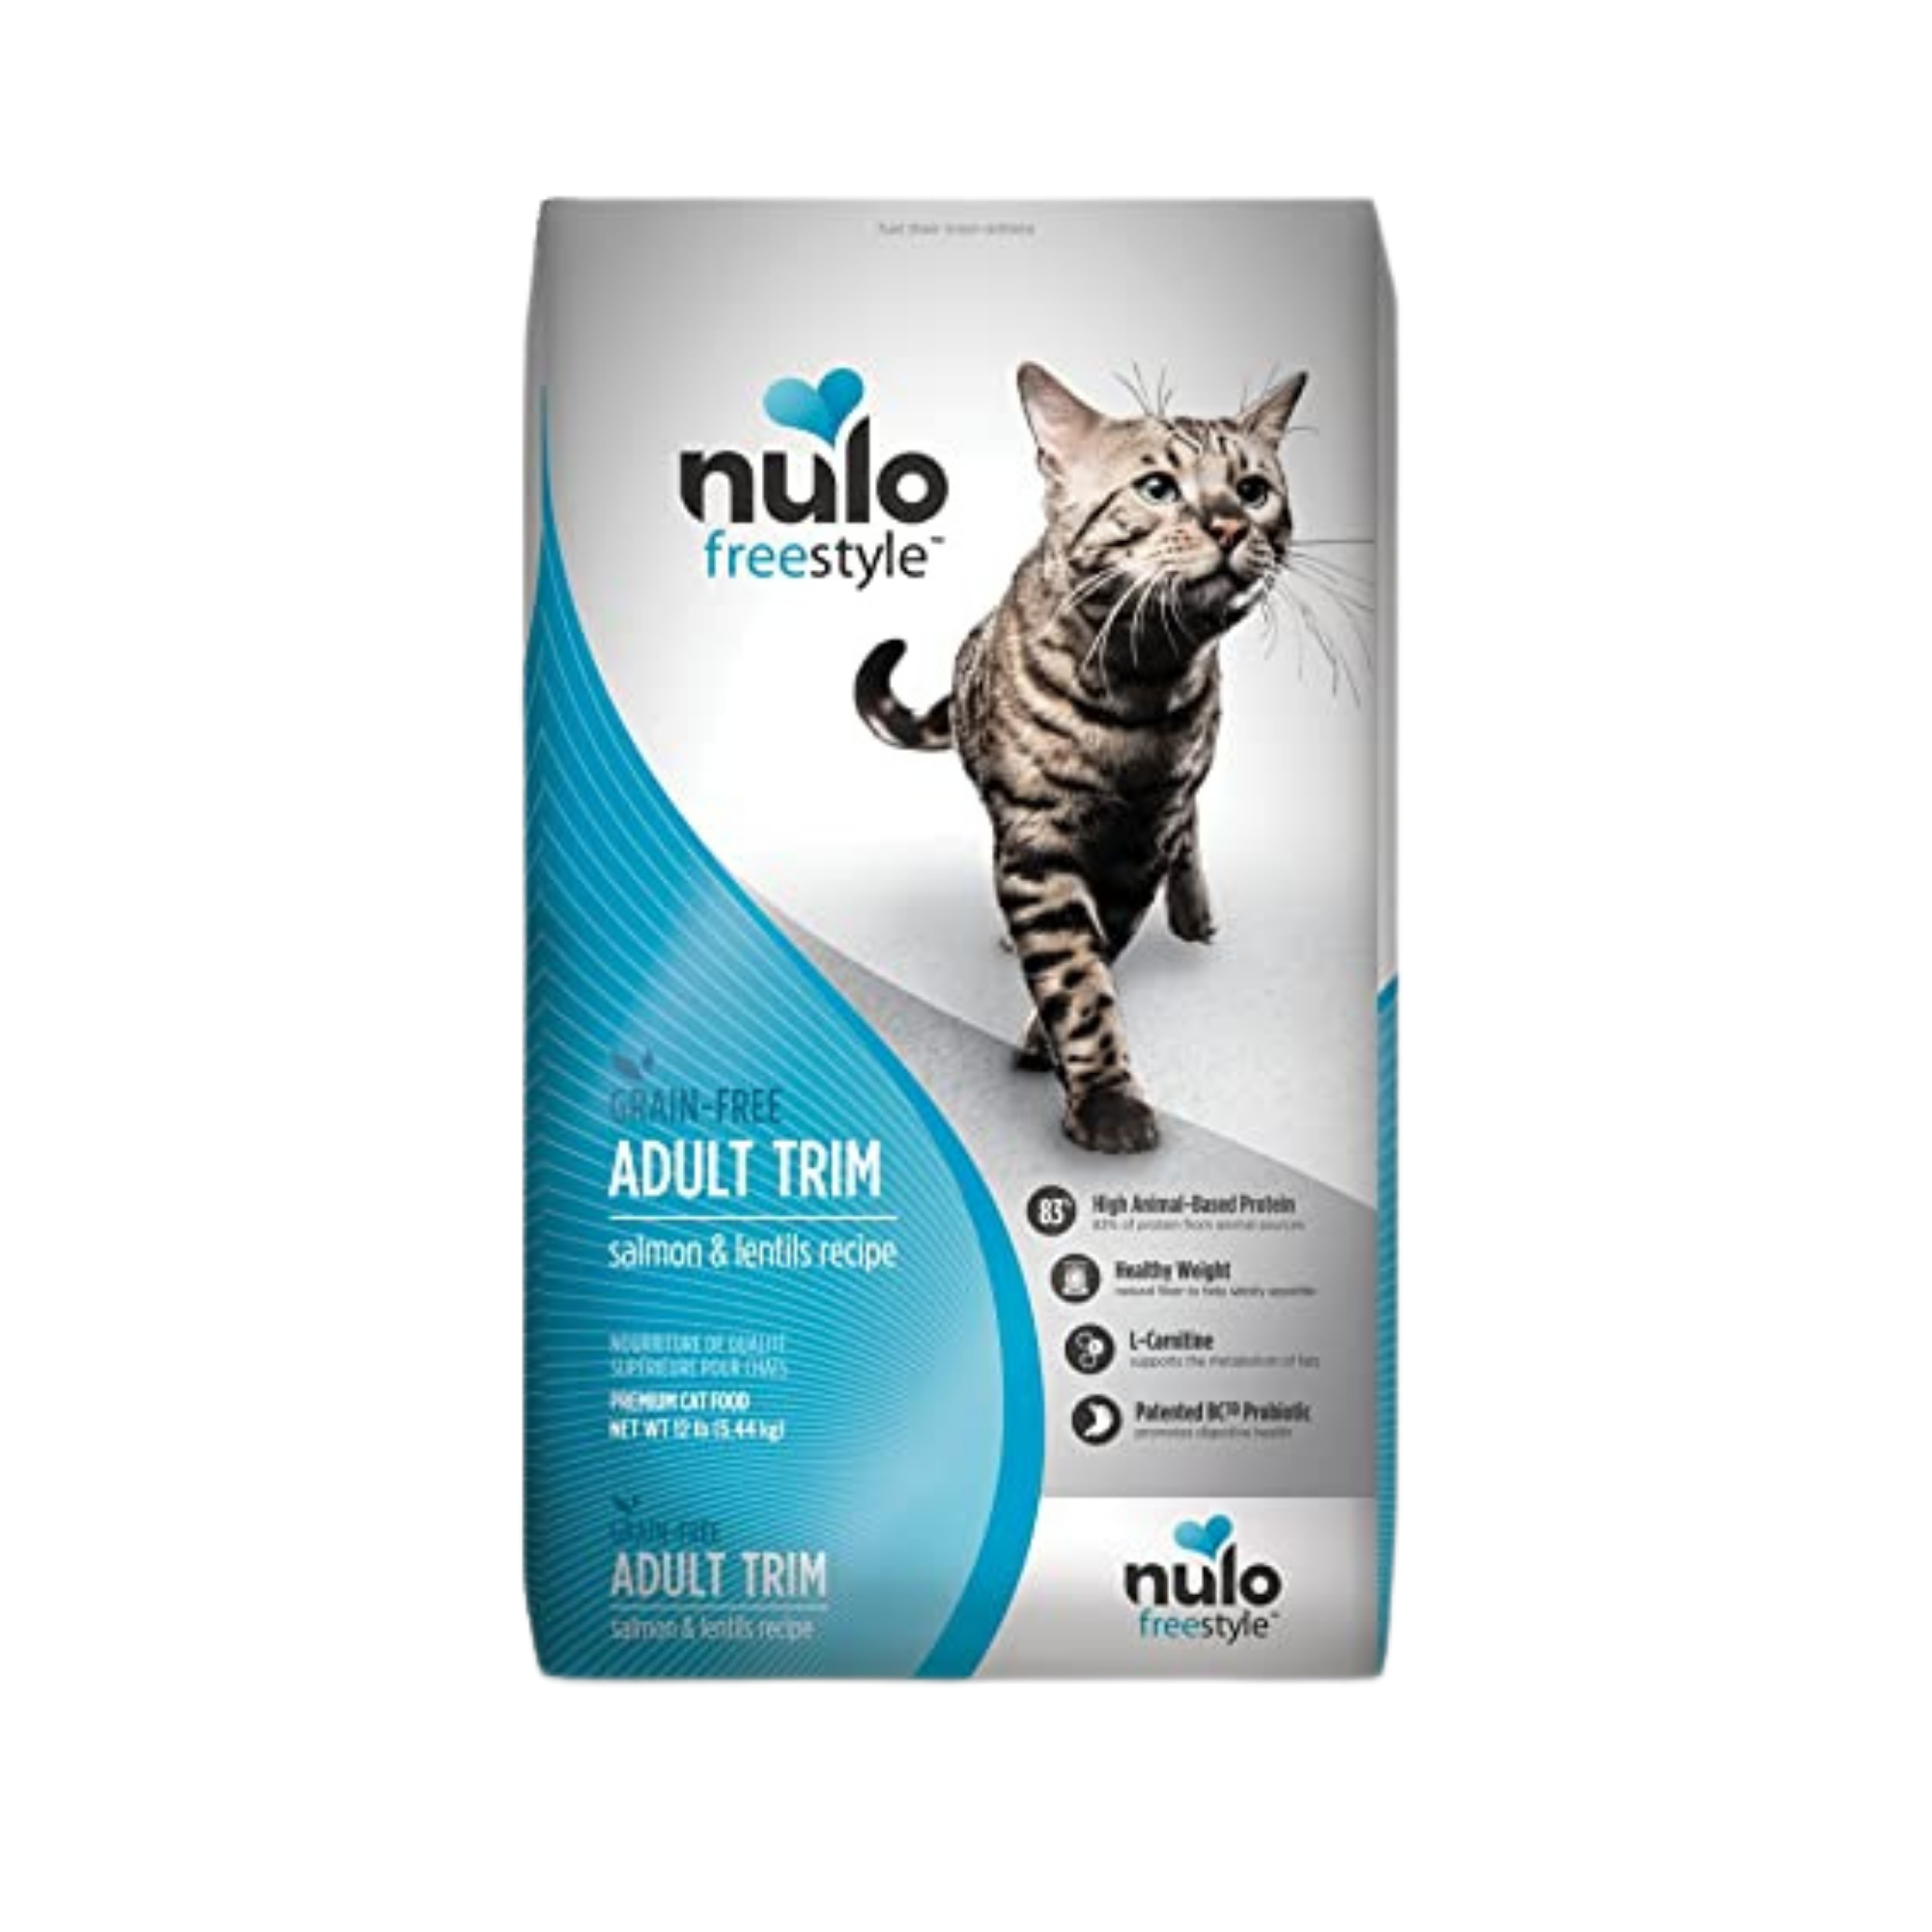 Nulo Freestyle Grain-Free Adult Trim Salmon & Lentils Recipe Dry Cat Food - Mutts & Co.